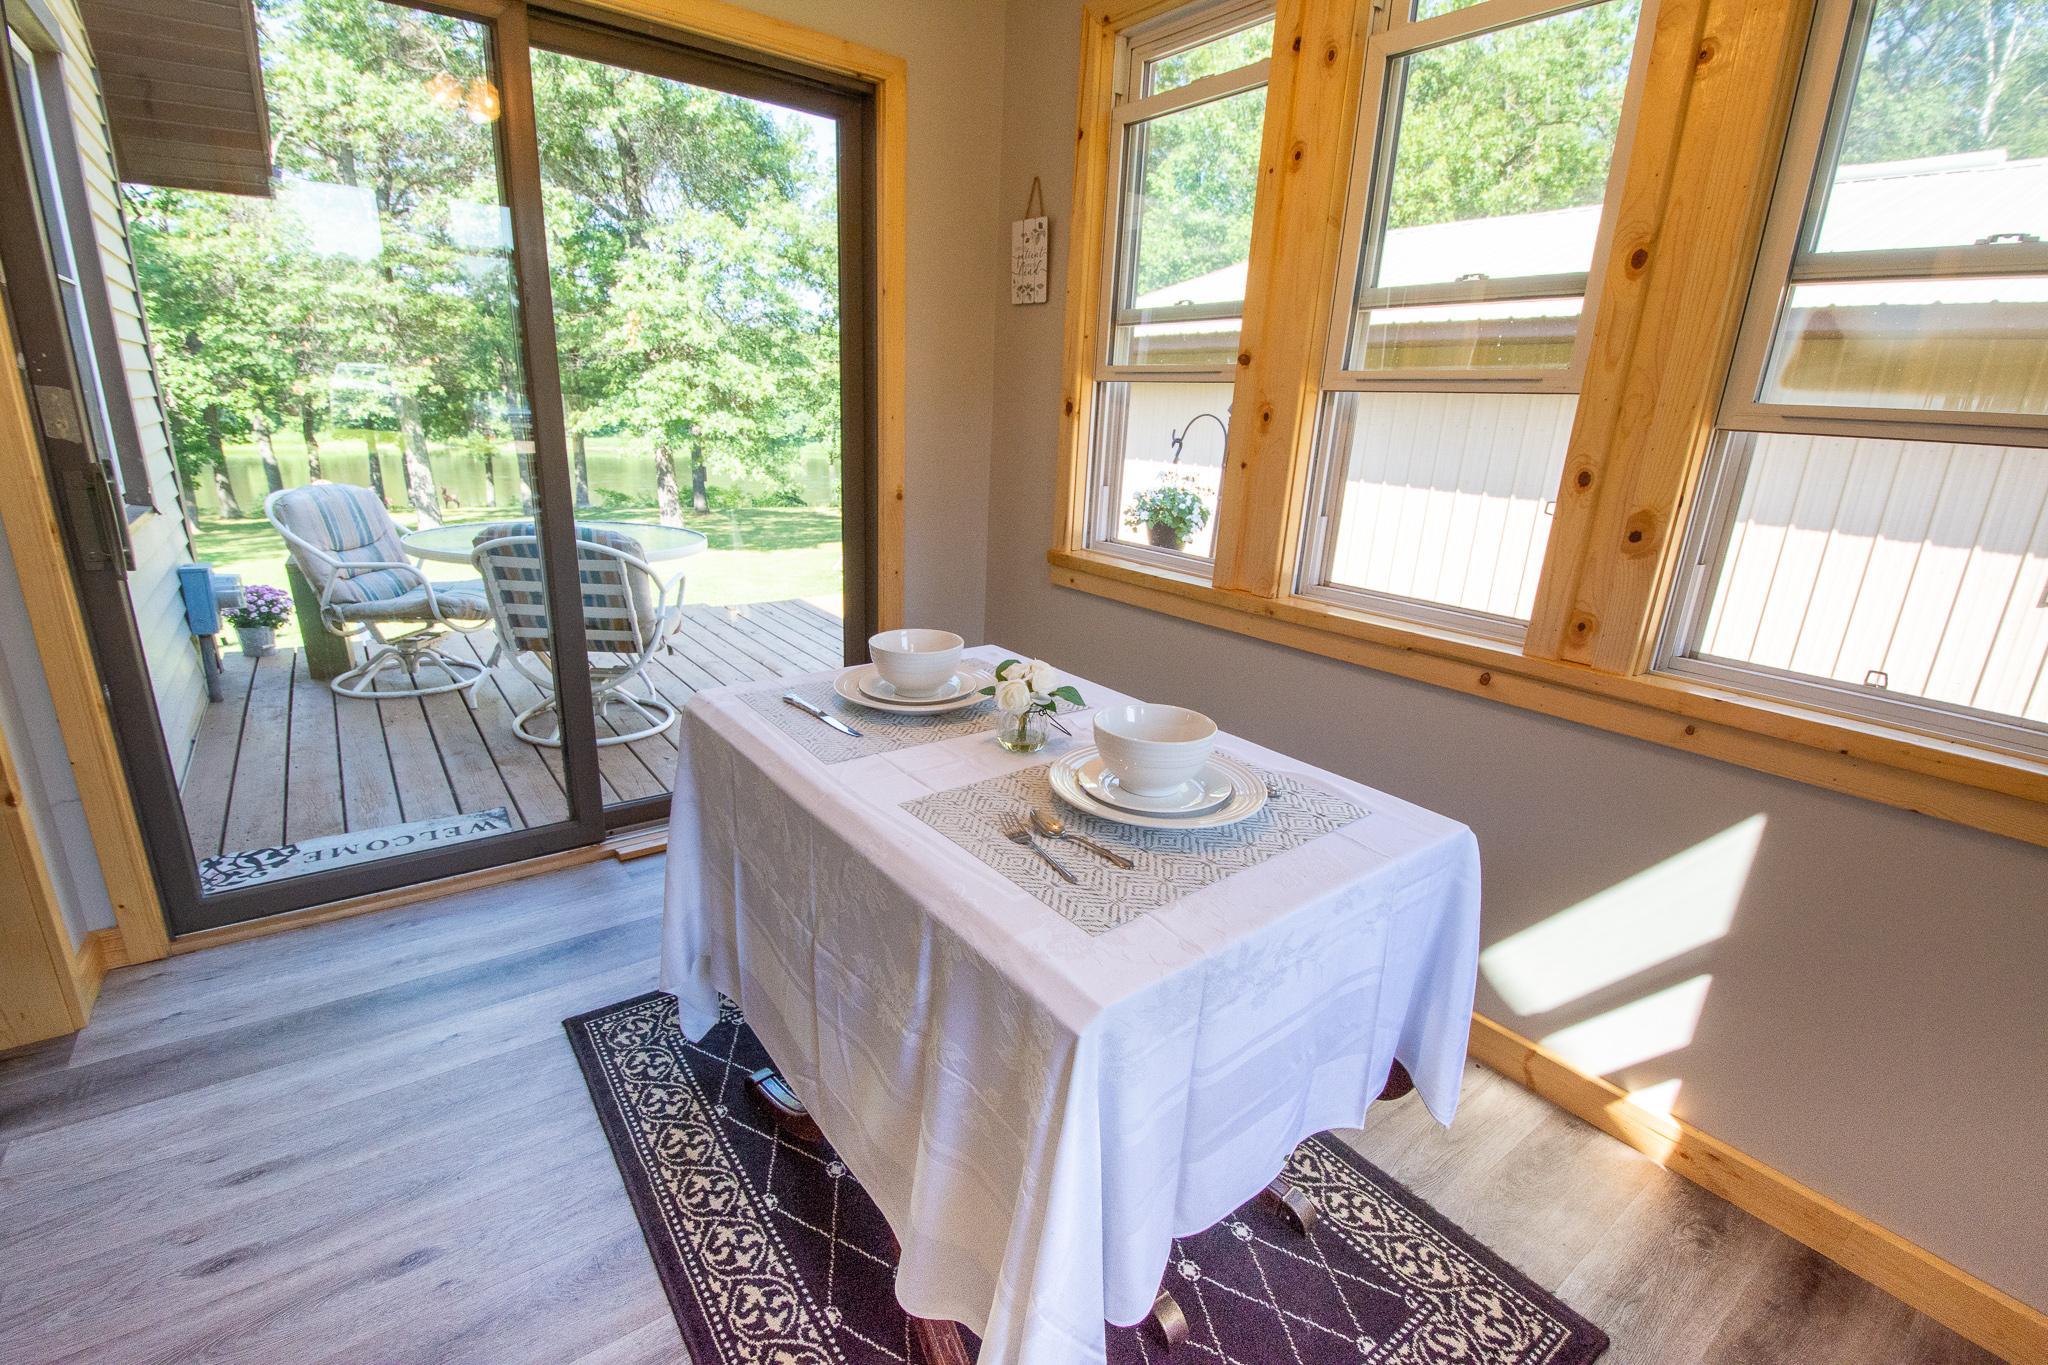 Sunroom/ Breakfast nook leads out to the patio, here you will find amazing river views and wildlife abounds!